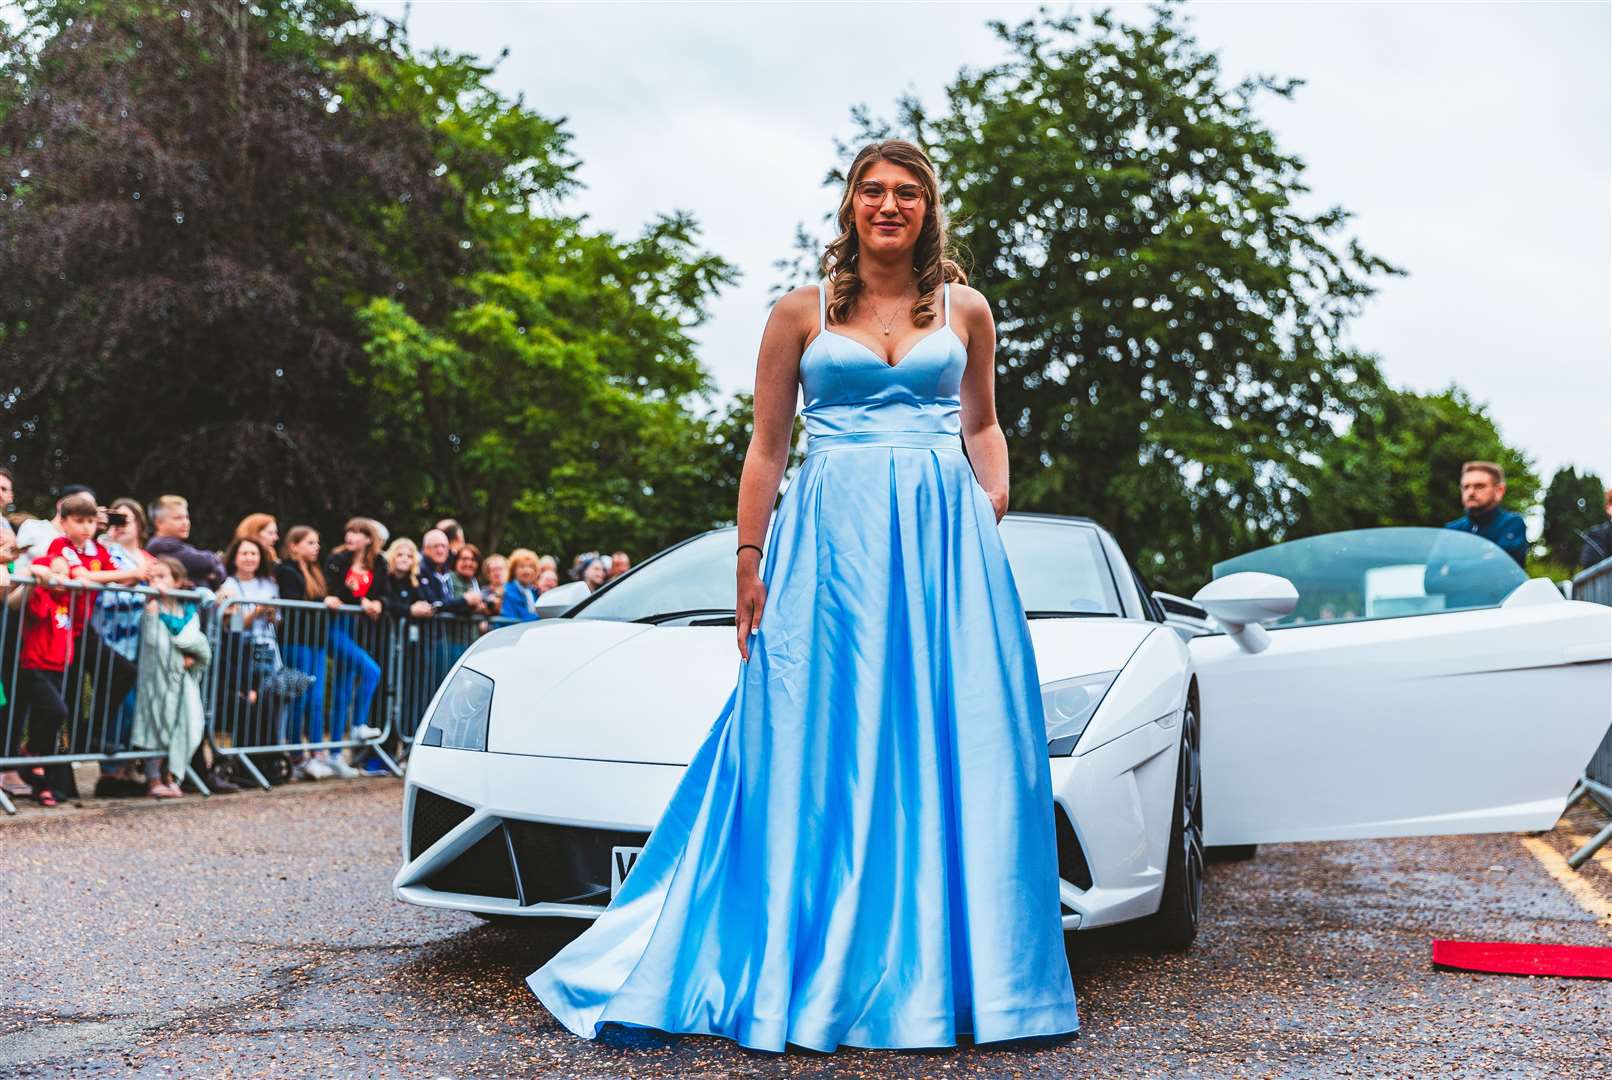 St Clements High School, Terrington St Clement, prom 2023. Picture: AMLE Photography/Barking Dog Media